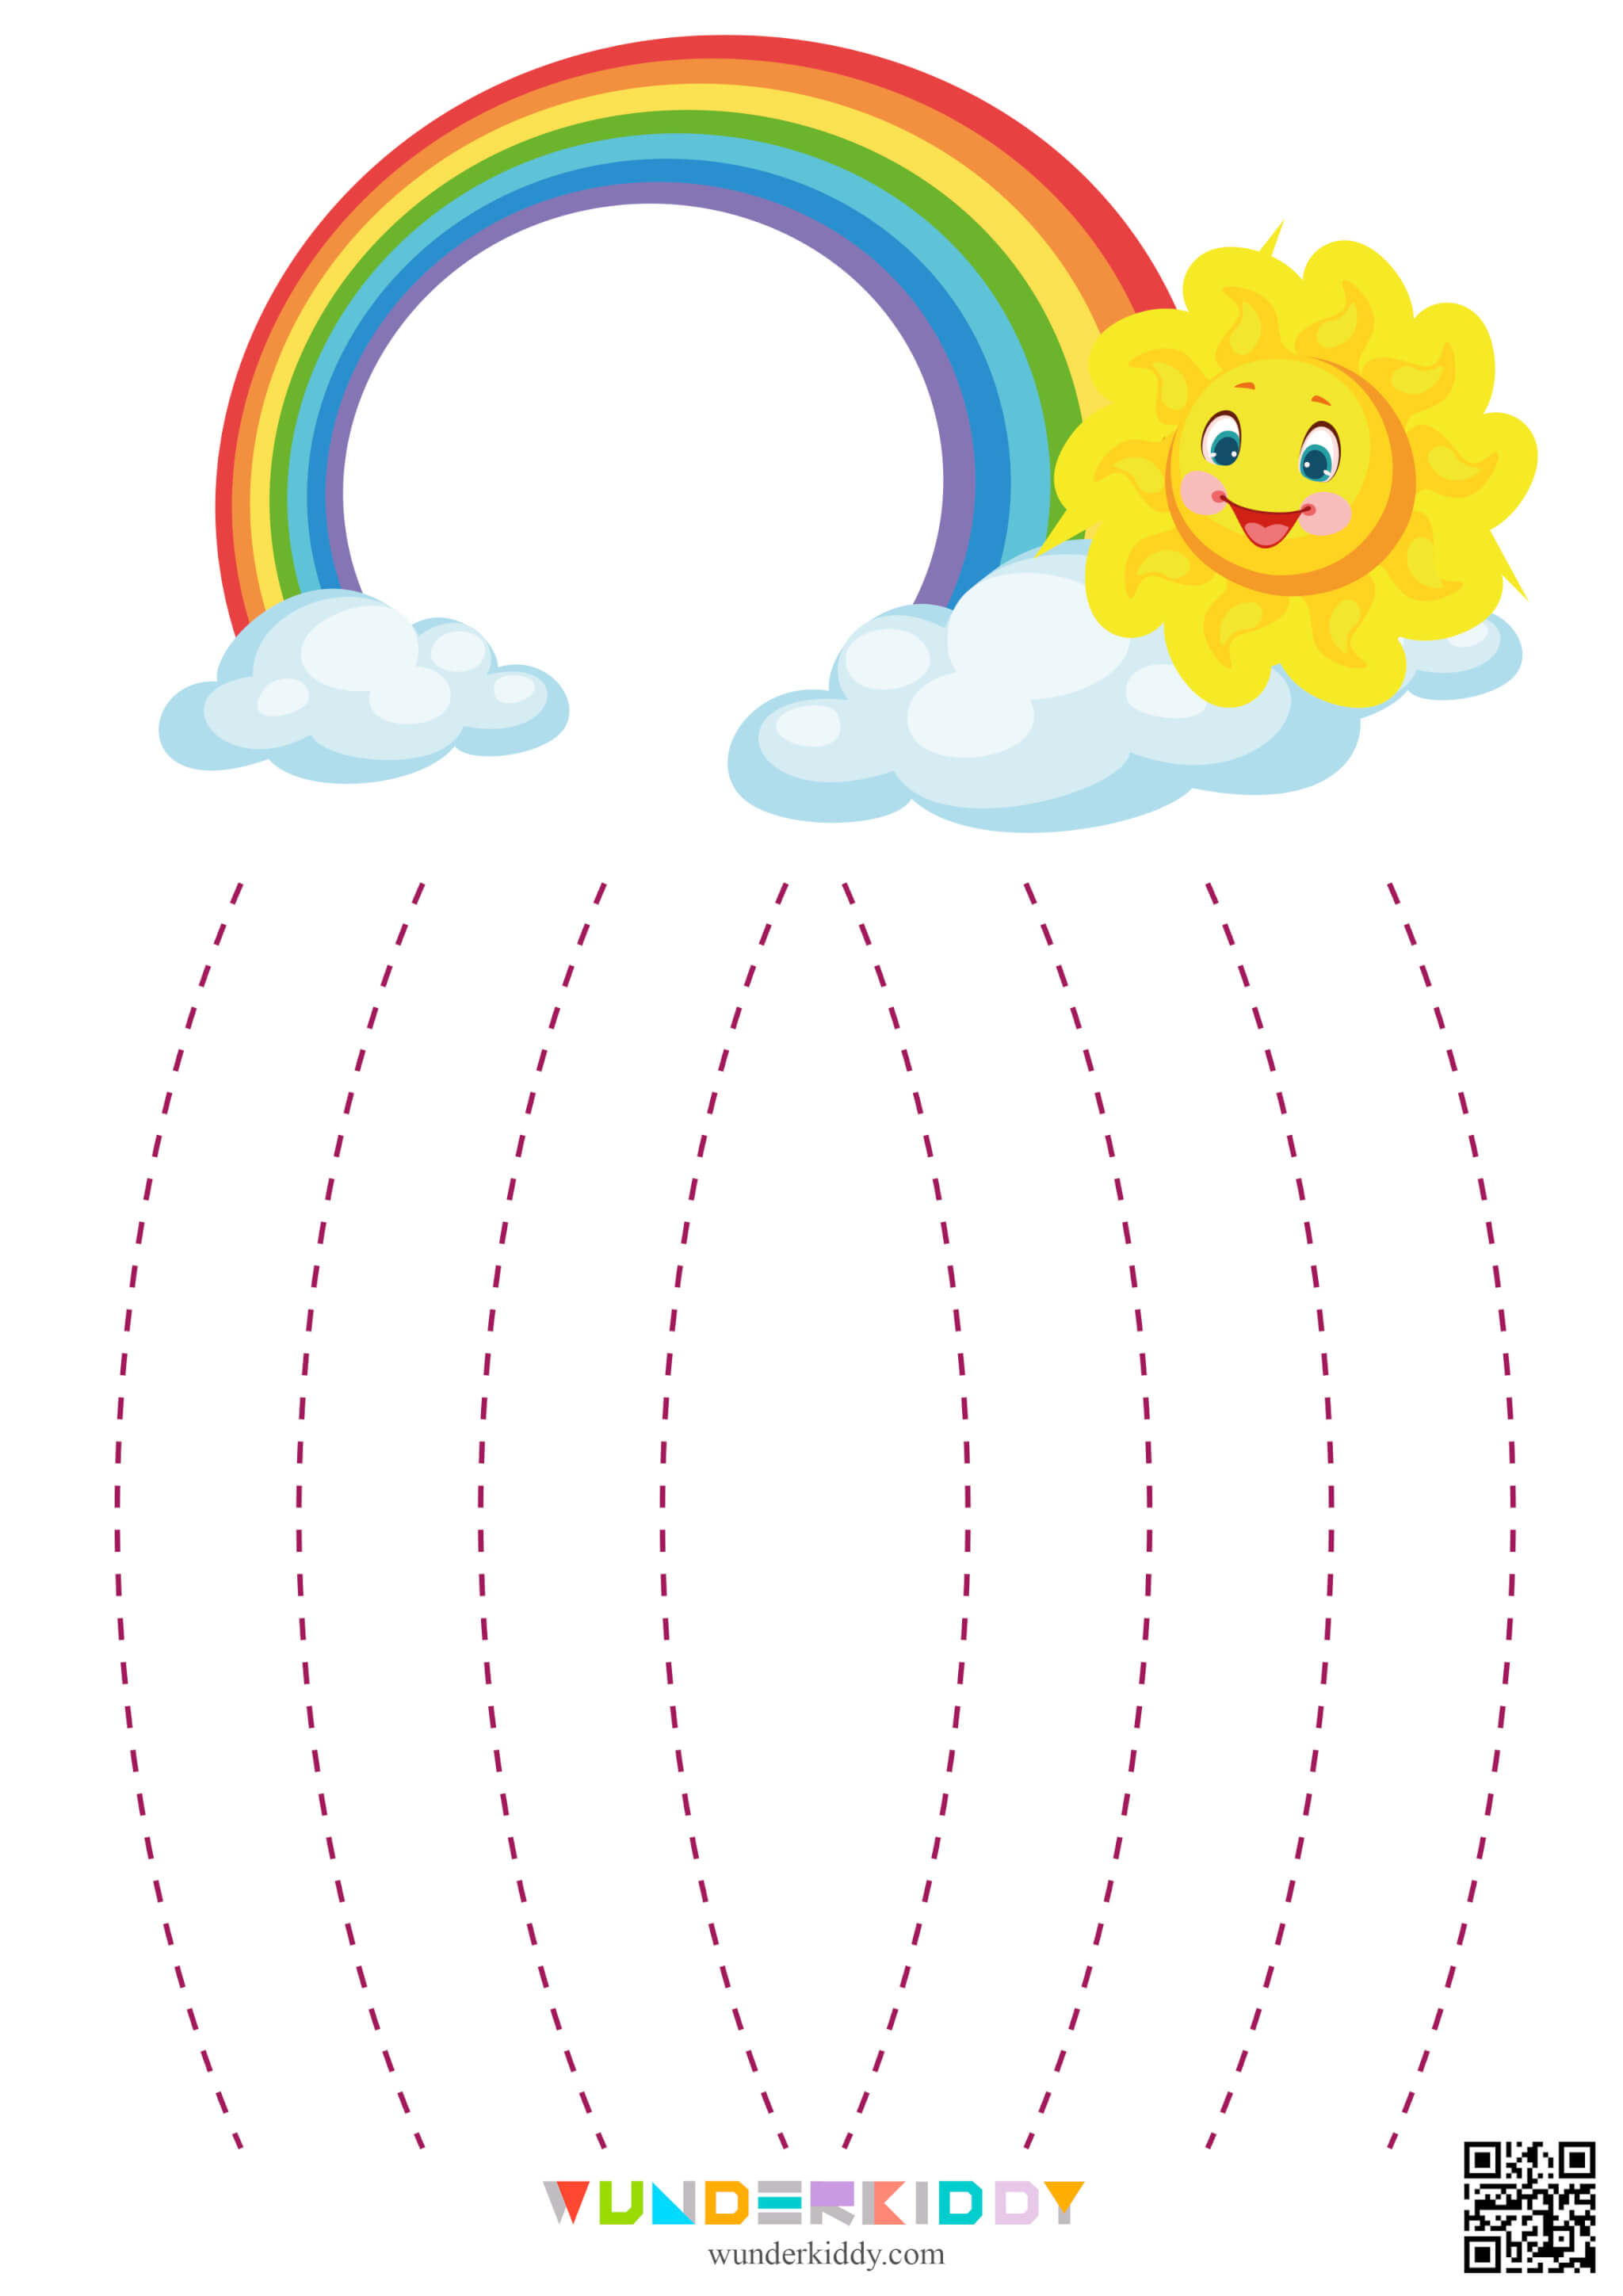 Worksheets «Sun and rainbow» - Image 8